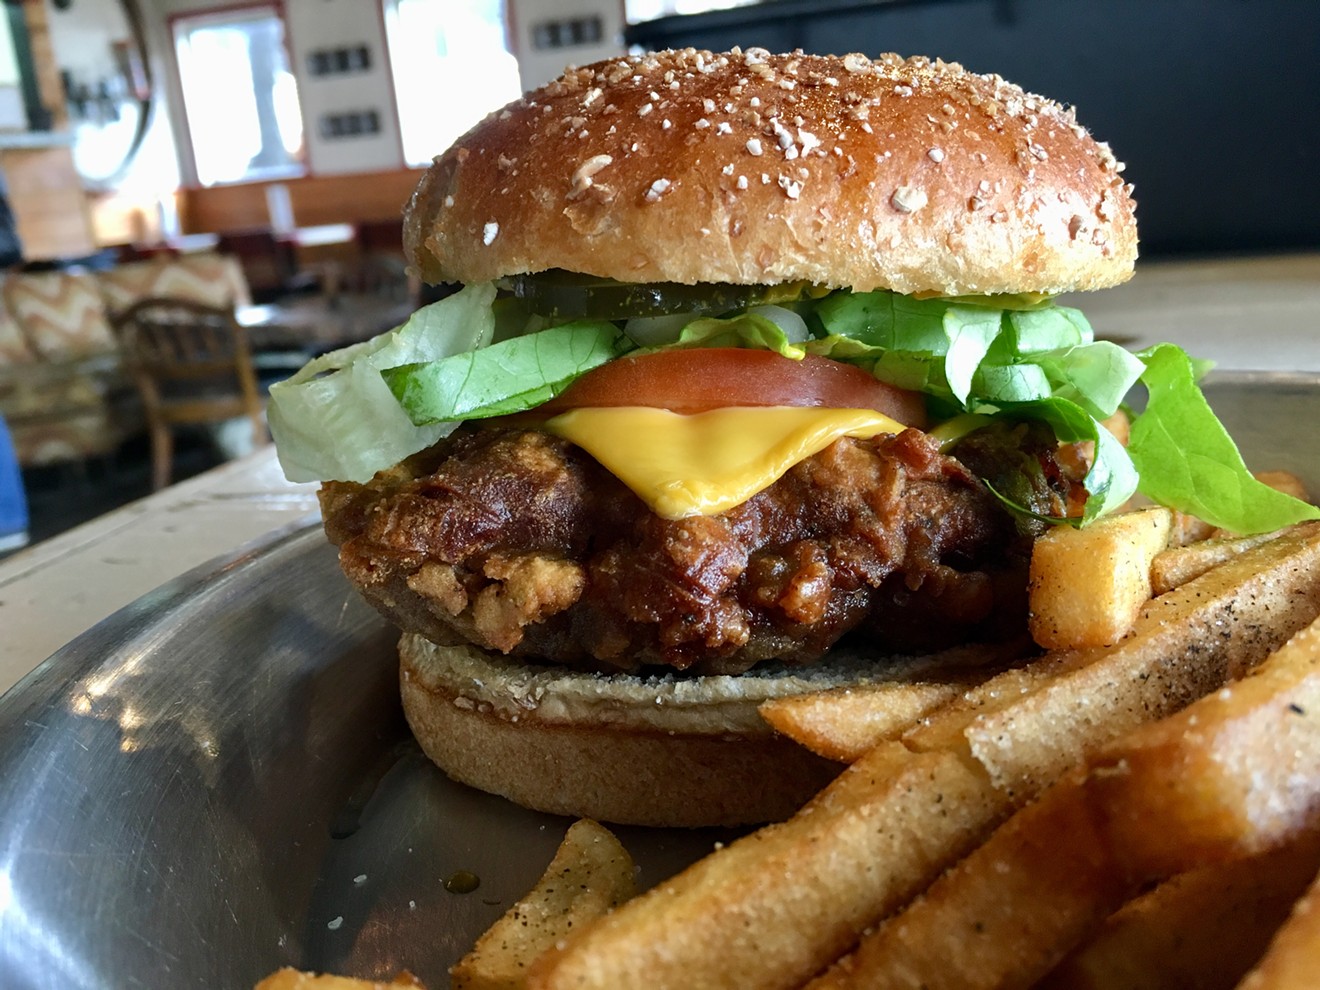 The chicken-fried burger at Chicken Scratch is $12 with French fries tossed with a sweet, spicy dust.